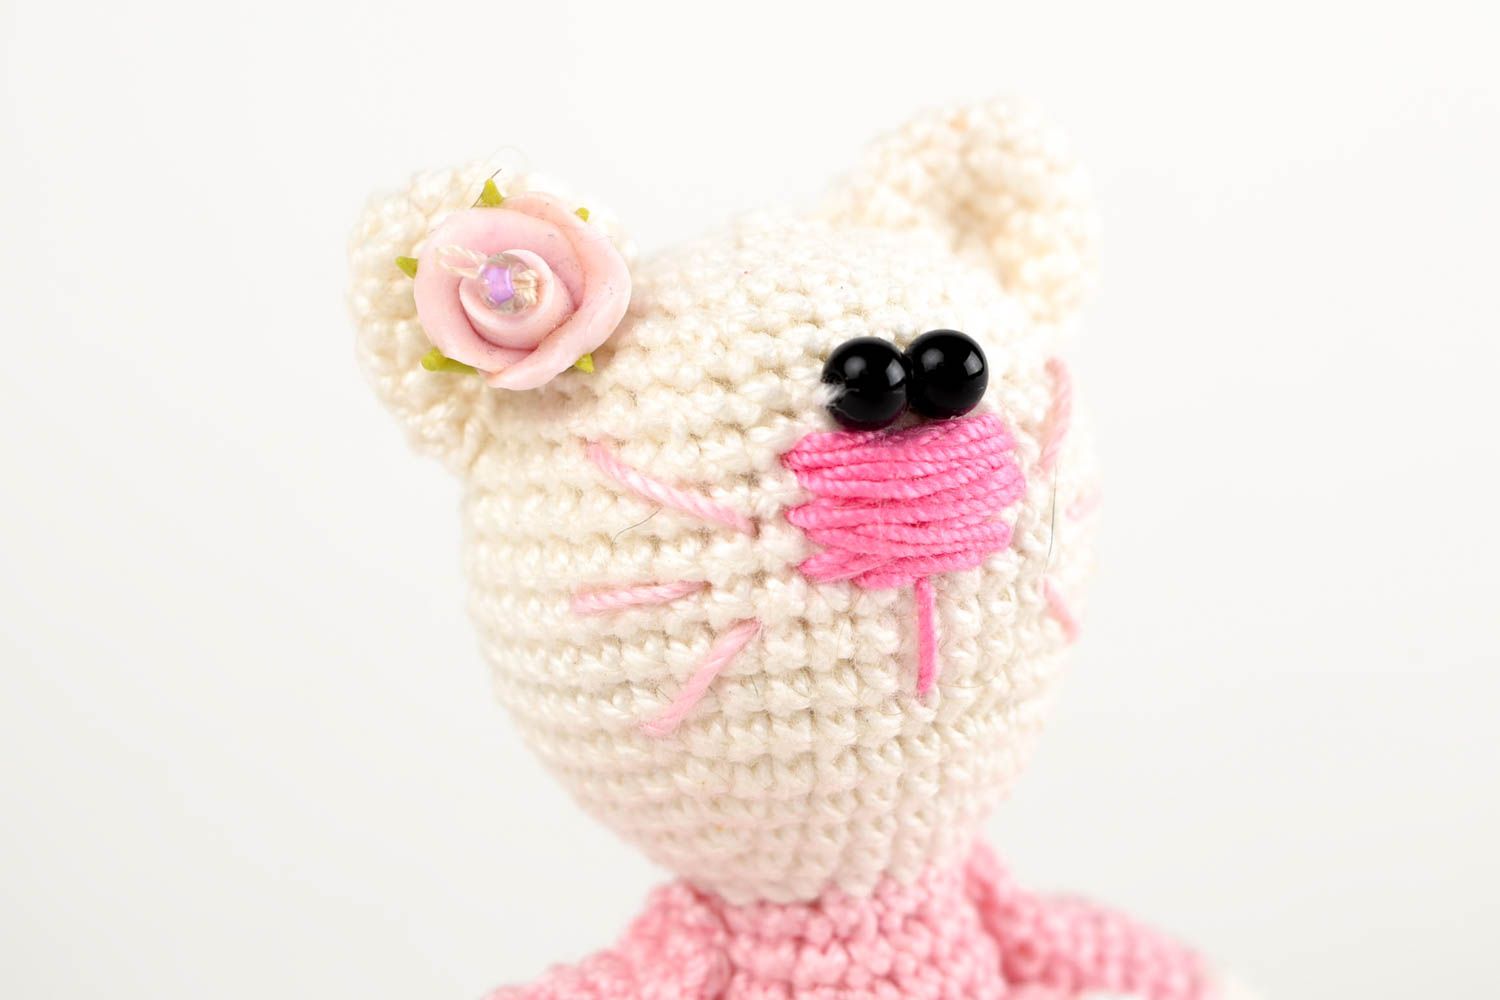 Handmade crocheted toy designer toy unusual toy for kids collectible toy photo 3